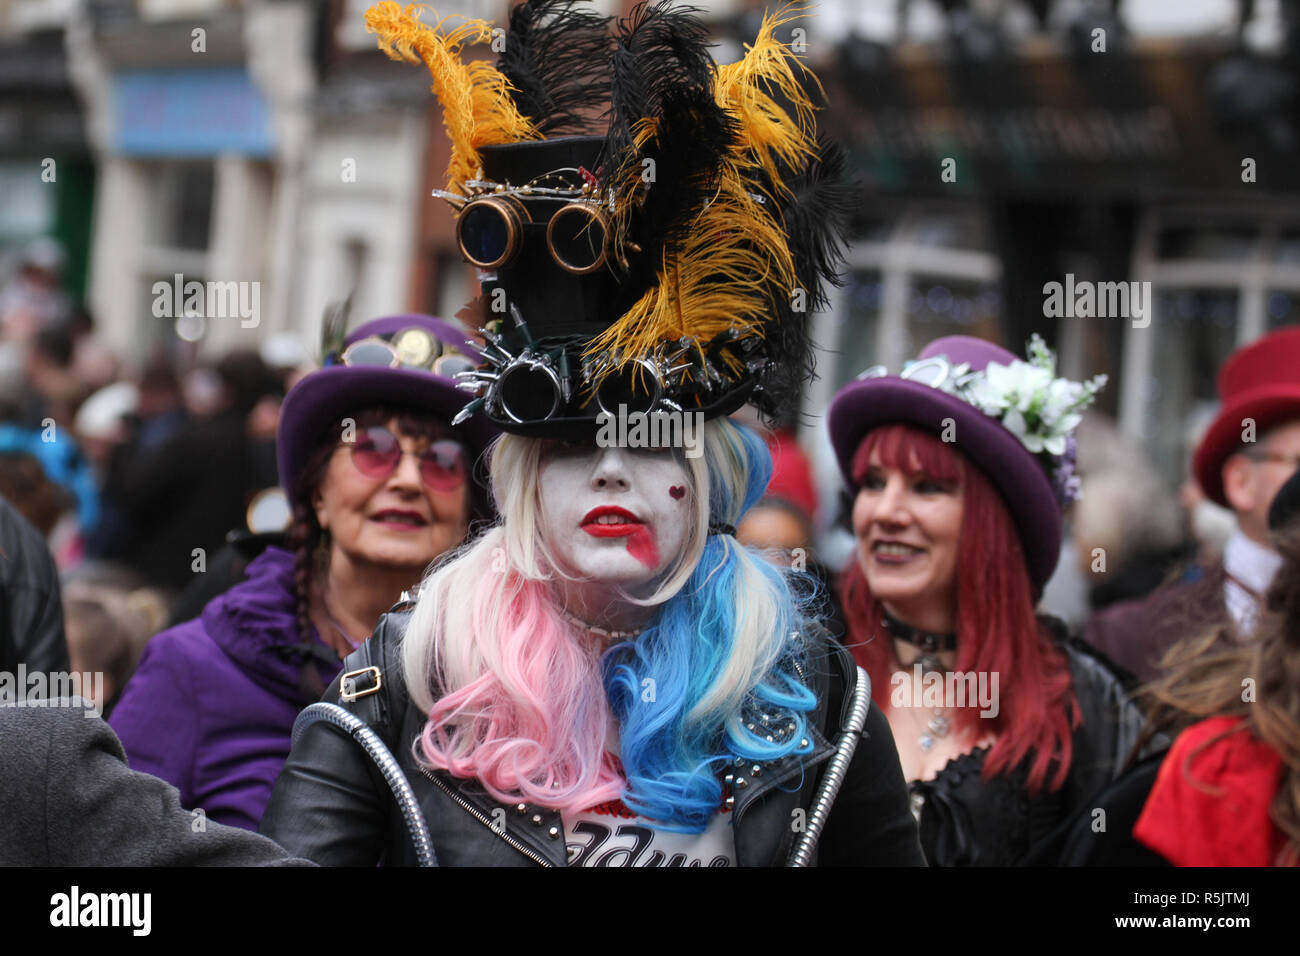 Rochester, Kent, UK. 1st December 2018: A parade participant in Steampunk costume takes part in the main parade. Hundreds of people attended the Dickensian Festival in Rochester on 1 December 2018. The festival's main parade has participants in Victorian period costume from the Dickensian age. The town and area was the setting of many of Charles Dickens novels and is the setting to two annual festivals in his honor. Photos: David Mbiyu/ Alamy Live News Stock Photo